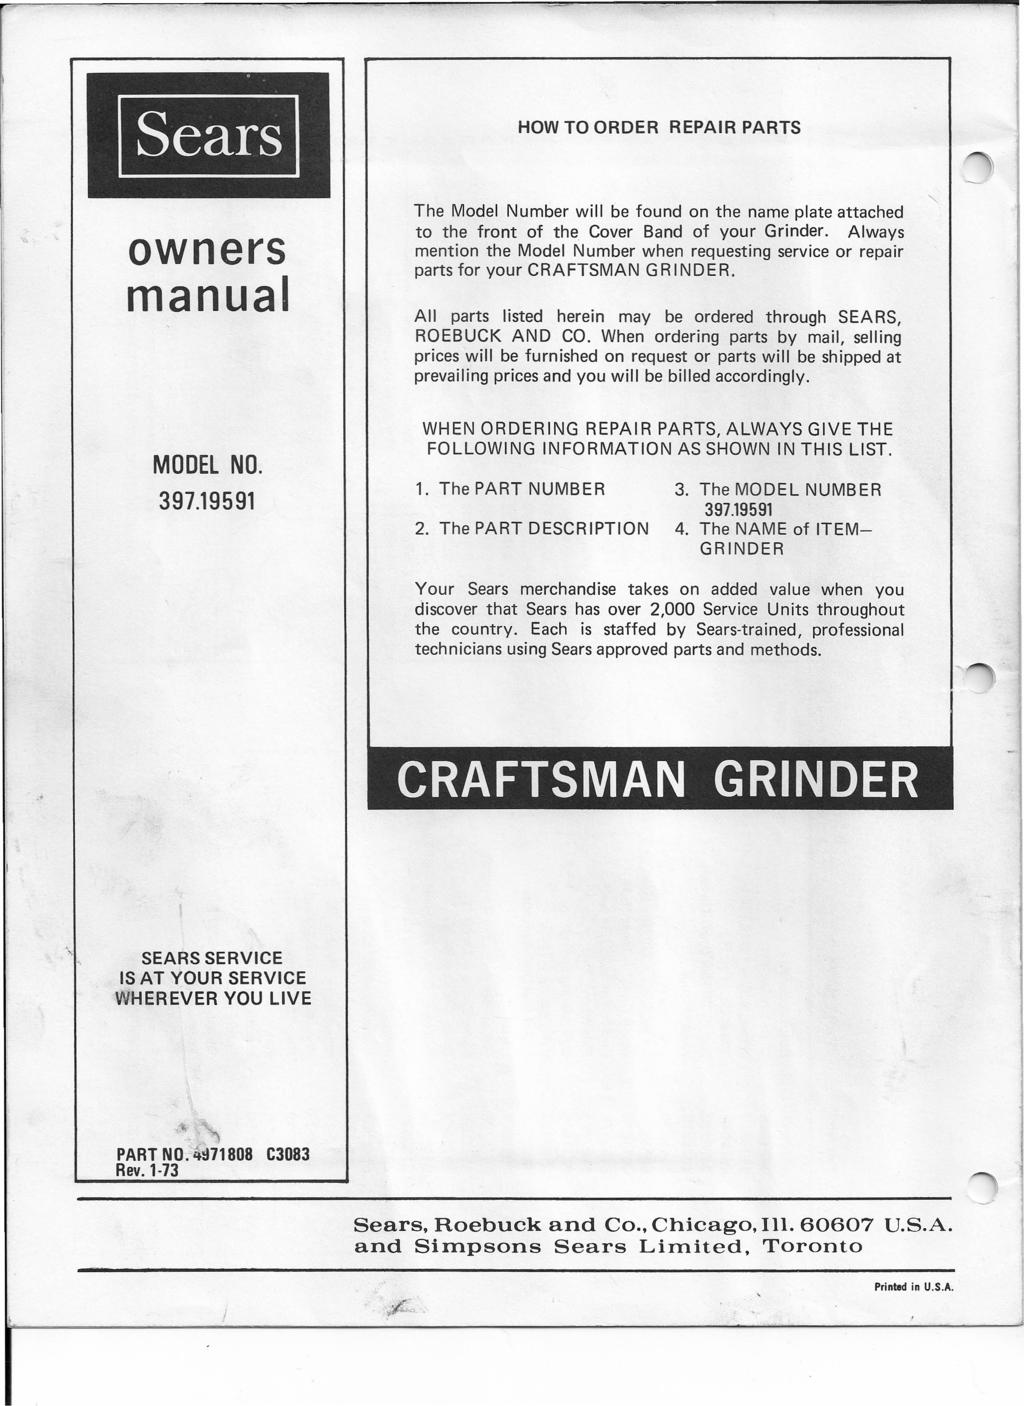 Sears HOW TO ORDER REPAIR PARTS owners manual MODEL NO. 397.19591 The Model Number will be found on the name plate attached to the front of the Cover Band of your Grinder.